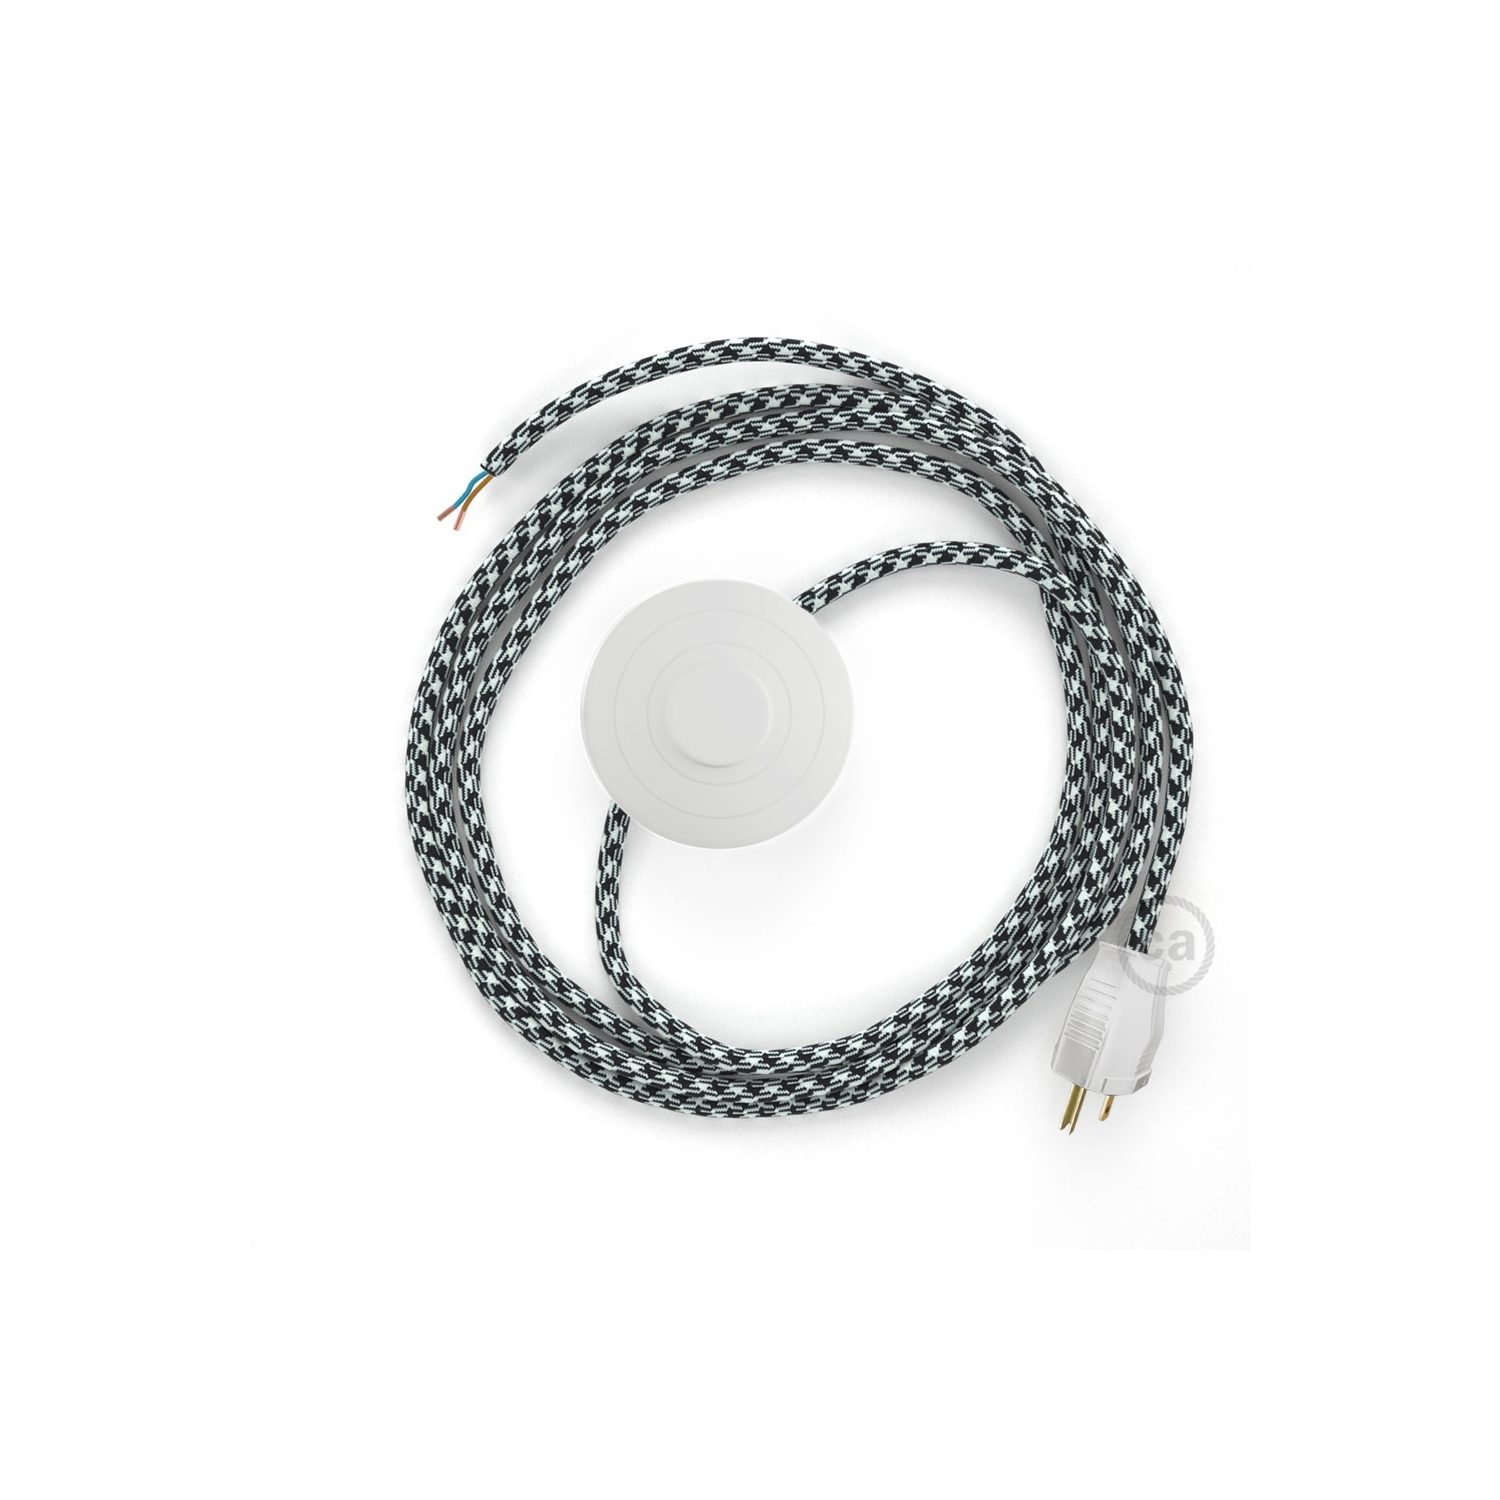 Power Cord with foot switch, RP04 Black & White Houndstooth - Choose color of switch/plug